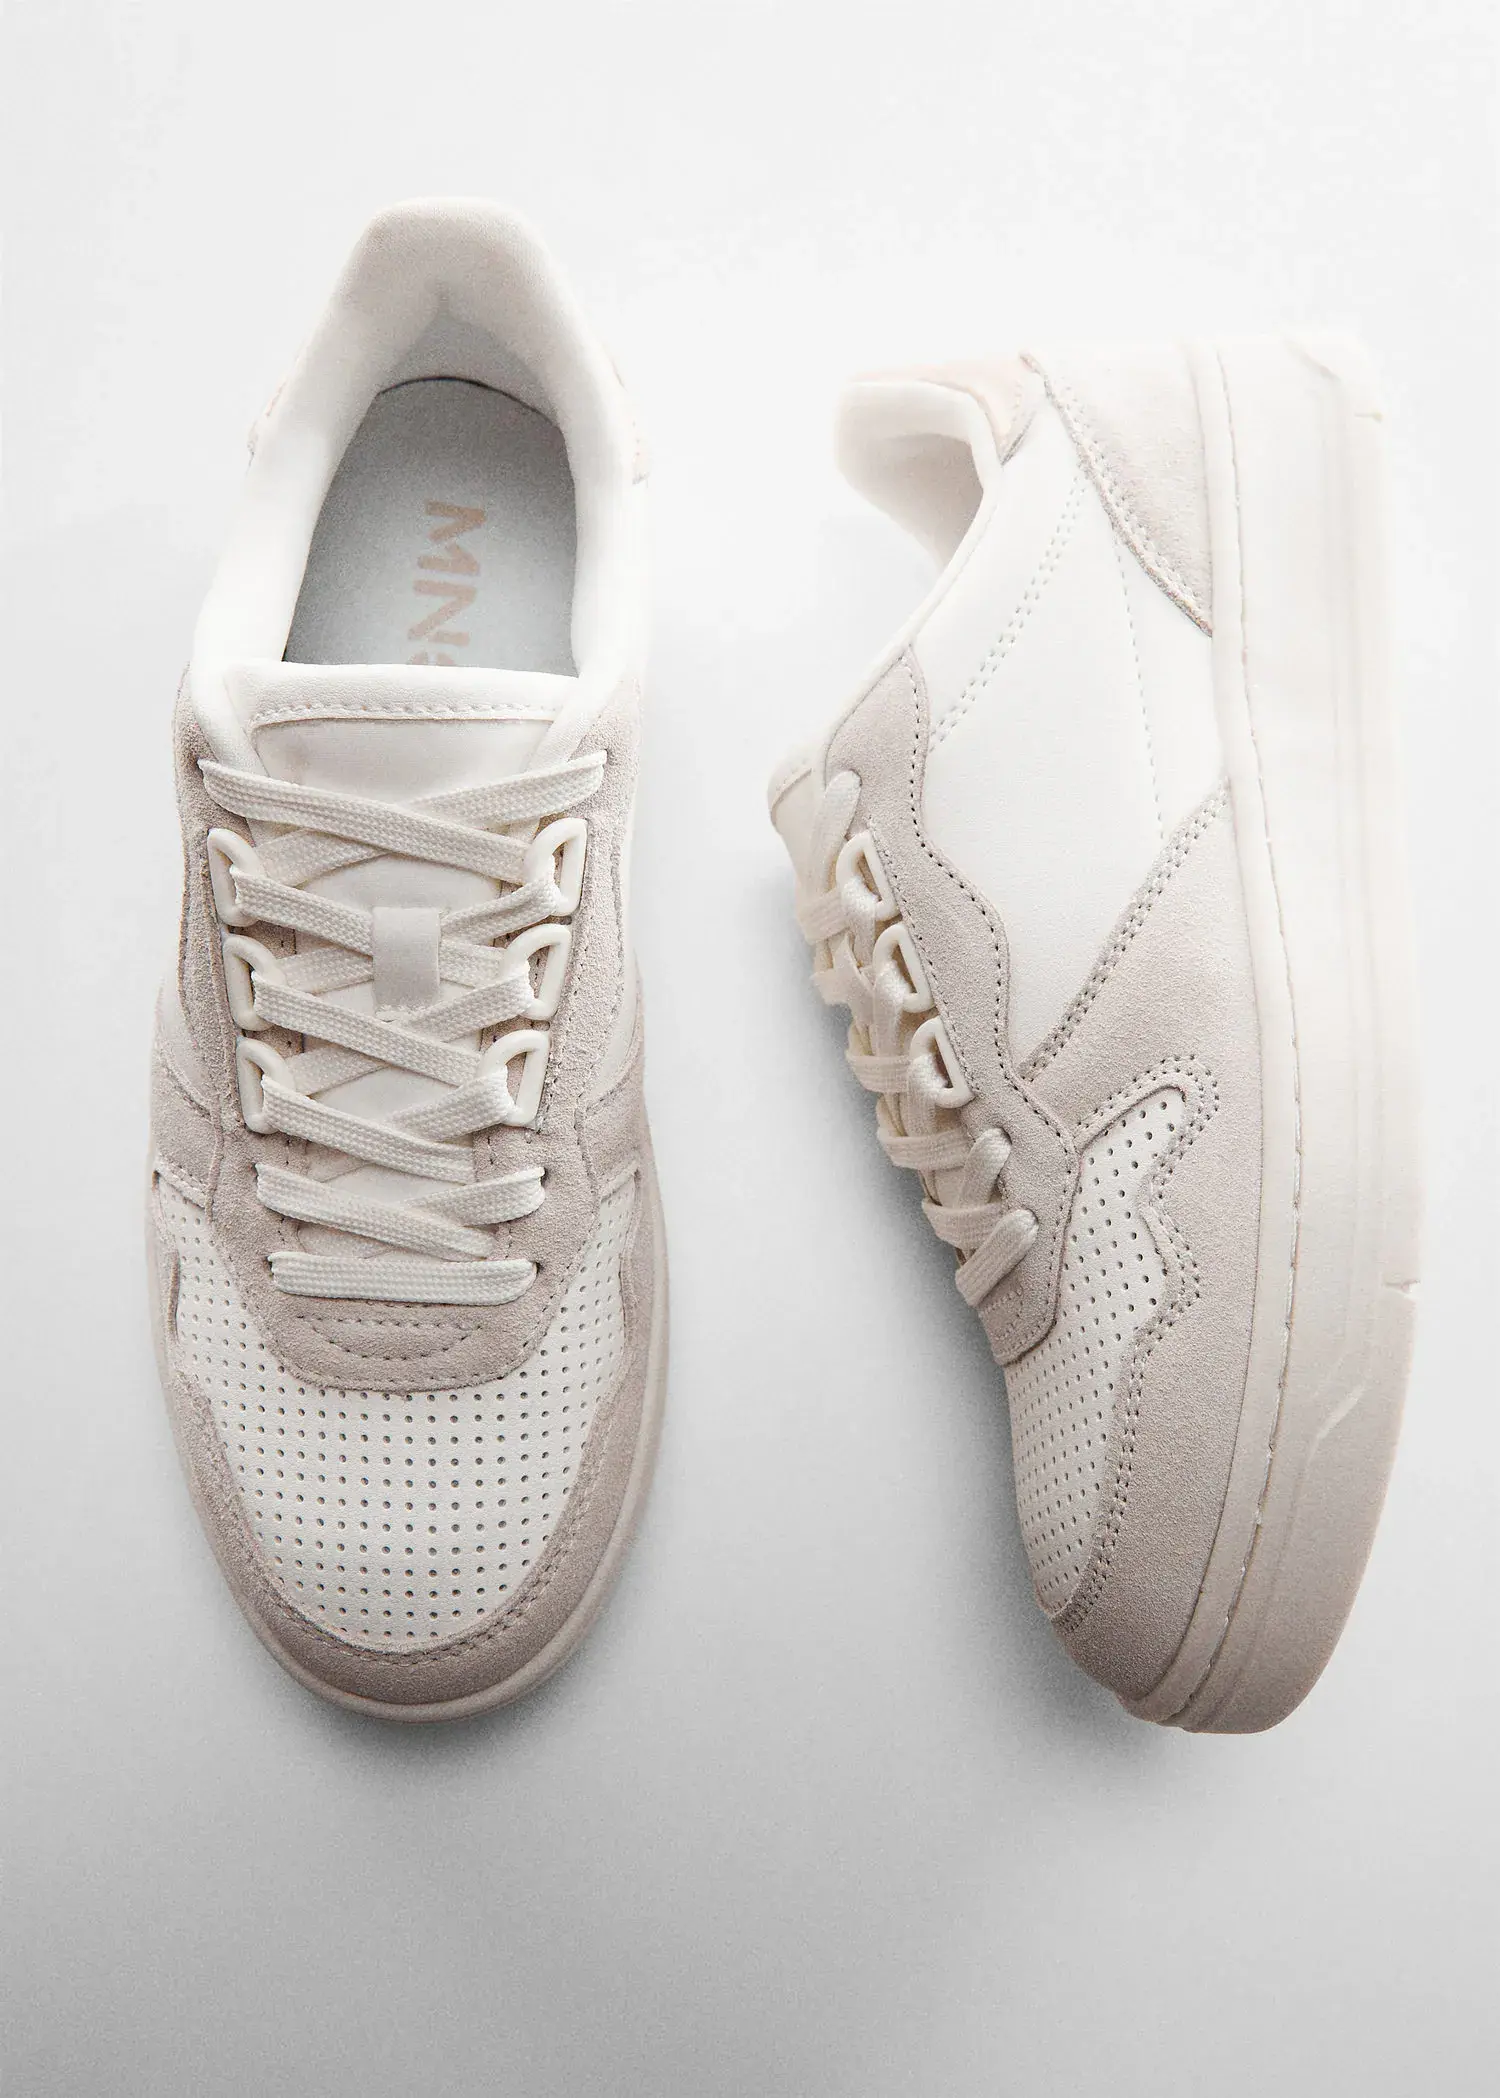 Mango Panels leather sneakers. a pair of white sneakers sitting next to each other on a table. 